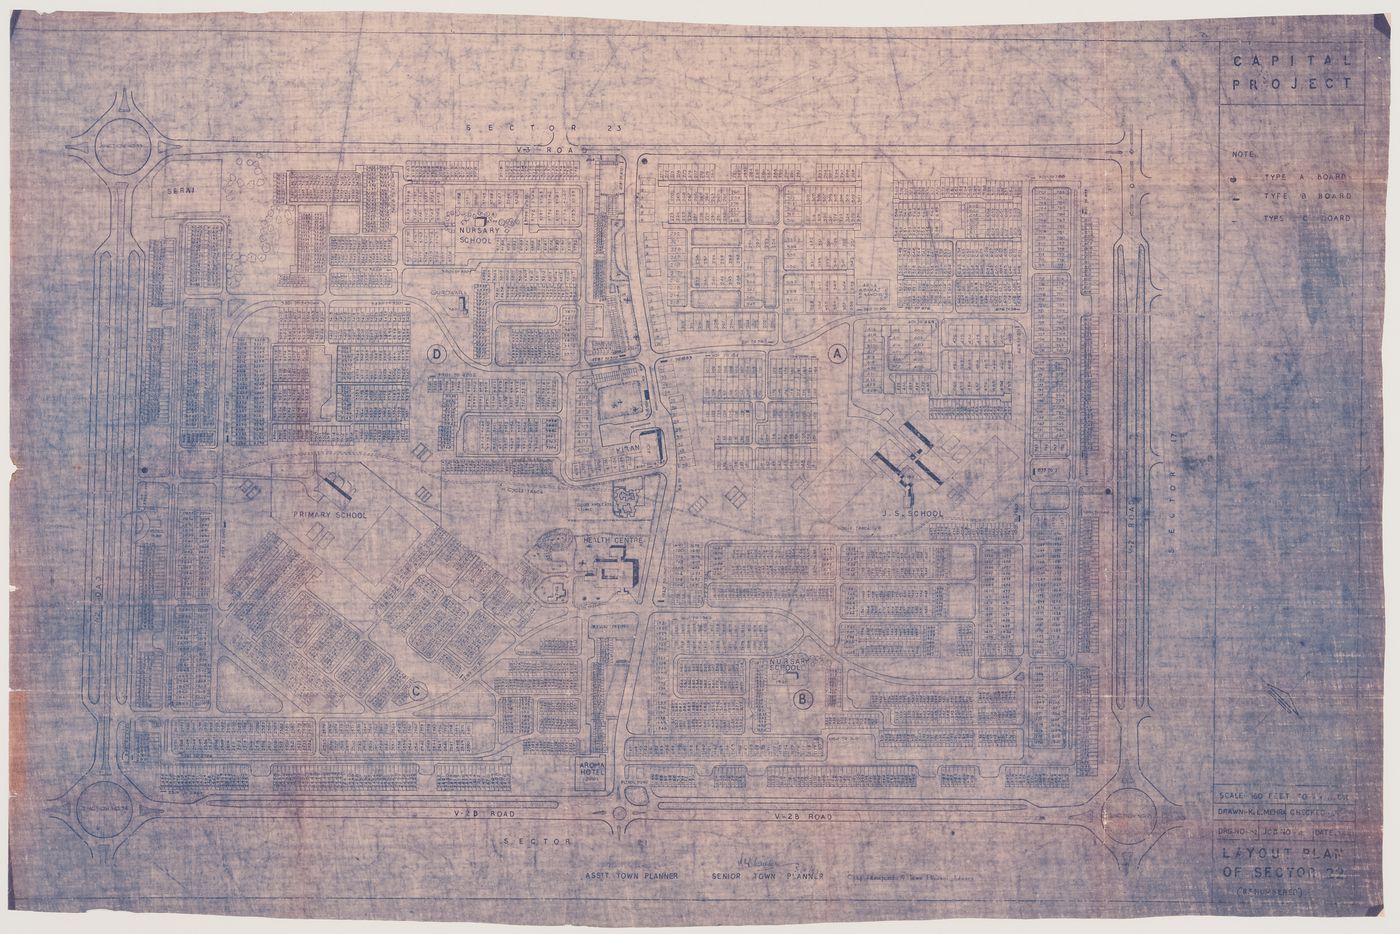 Layout plan of Sector 22 (Renumbered), Chandigarh, India